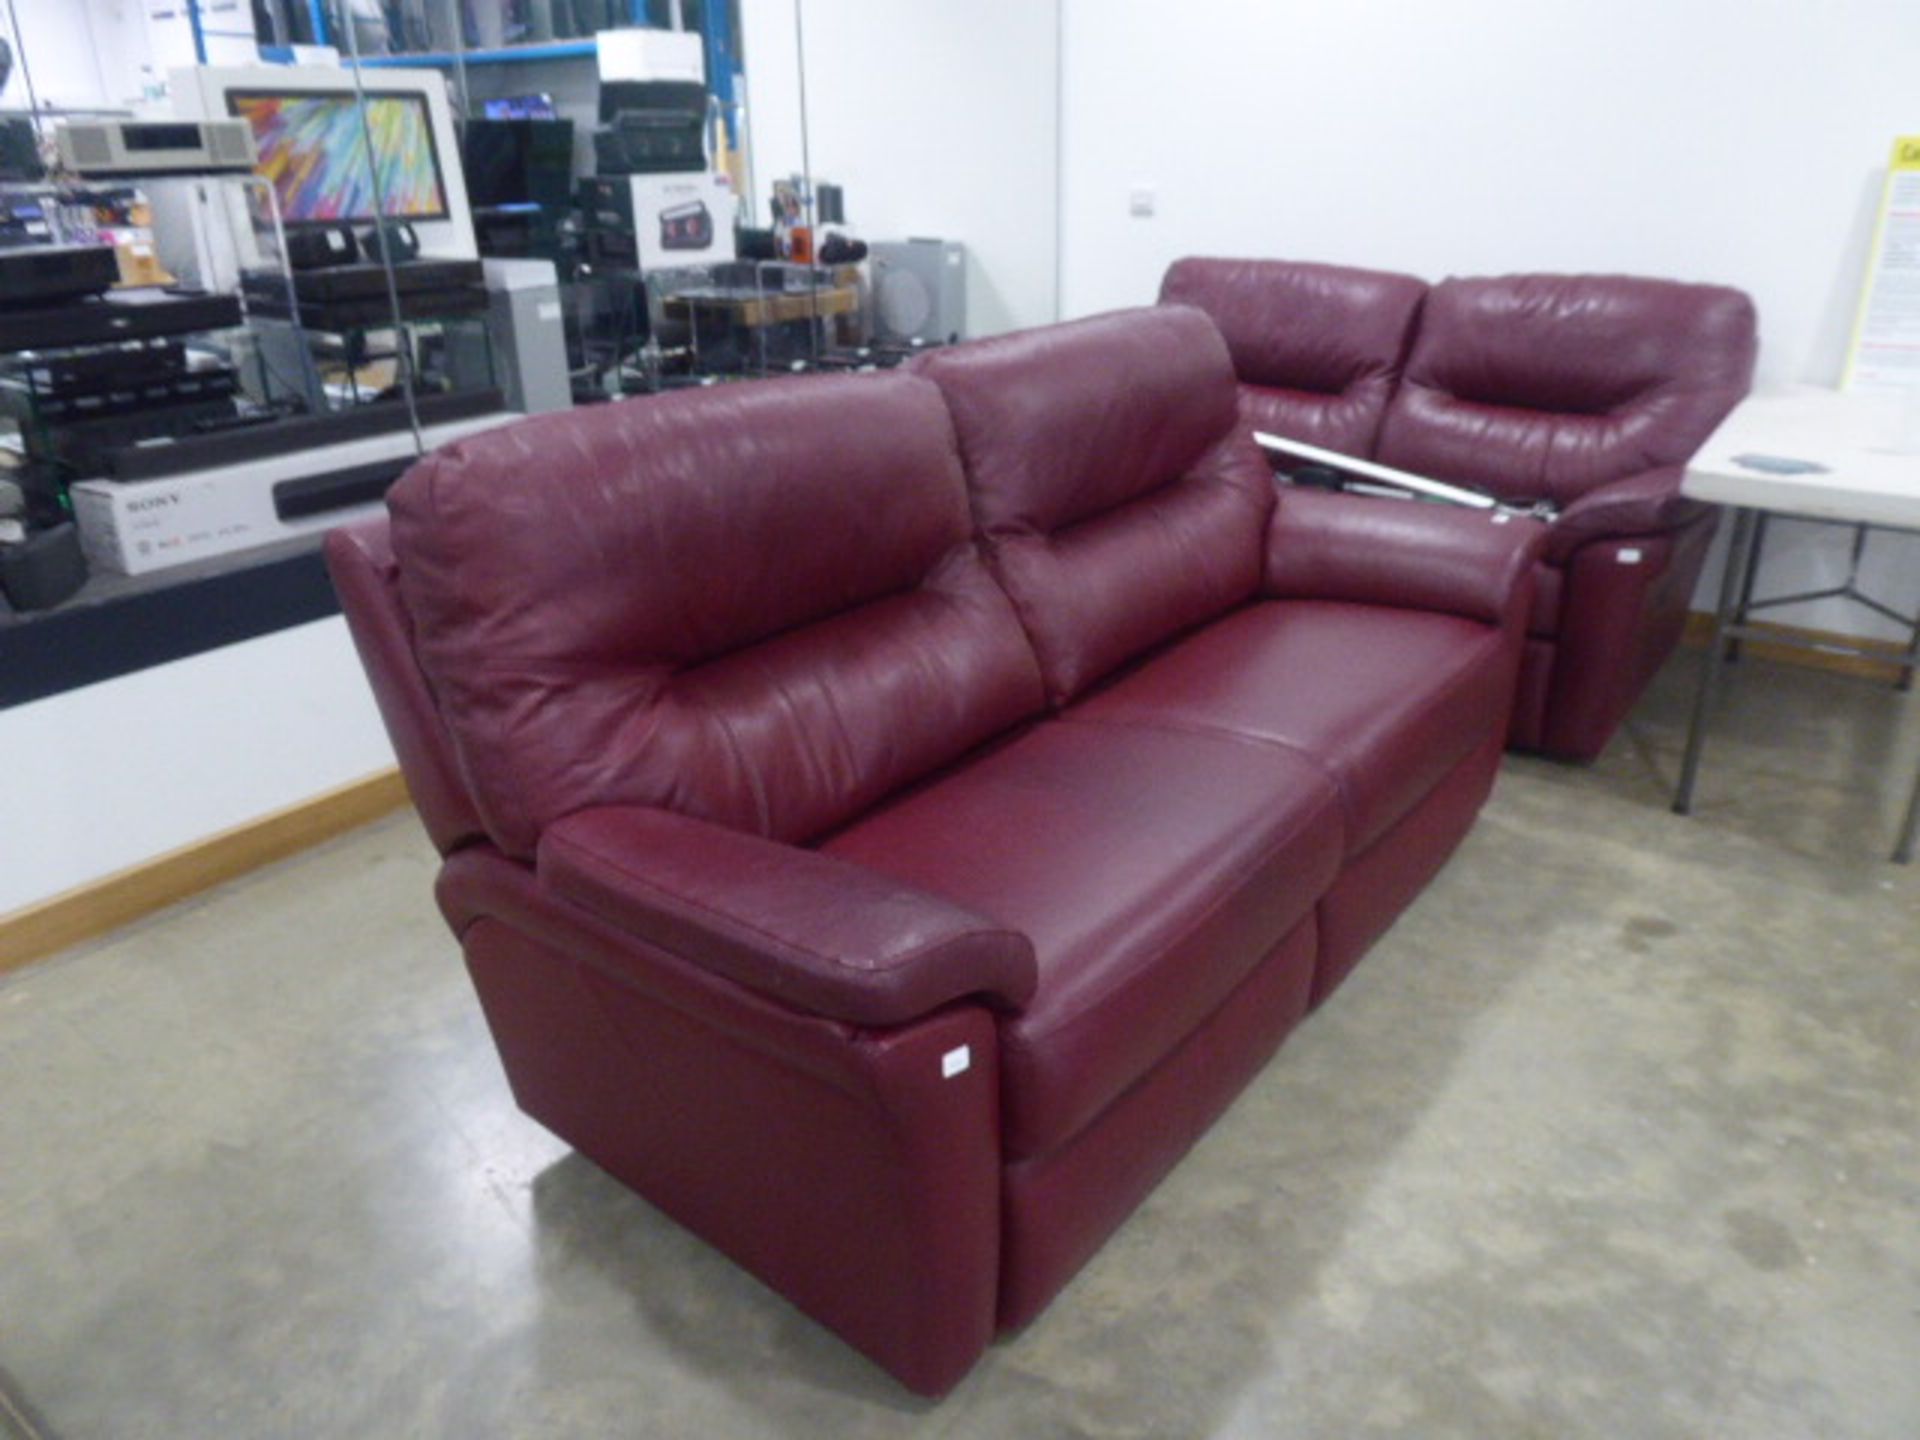 Red leather G Plan electric reclining 3 seater sofa plus a matching 2 seater